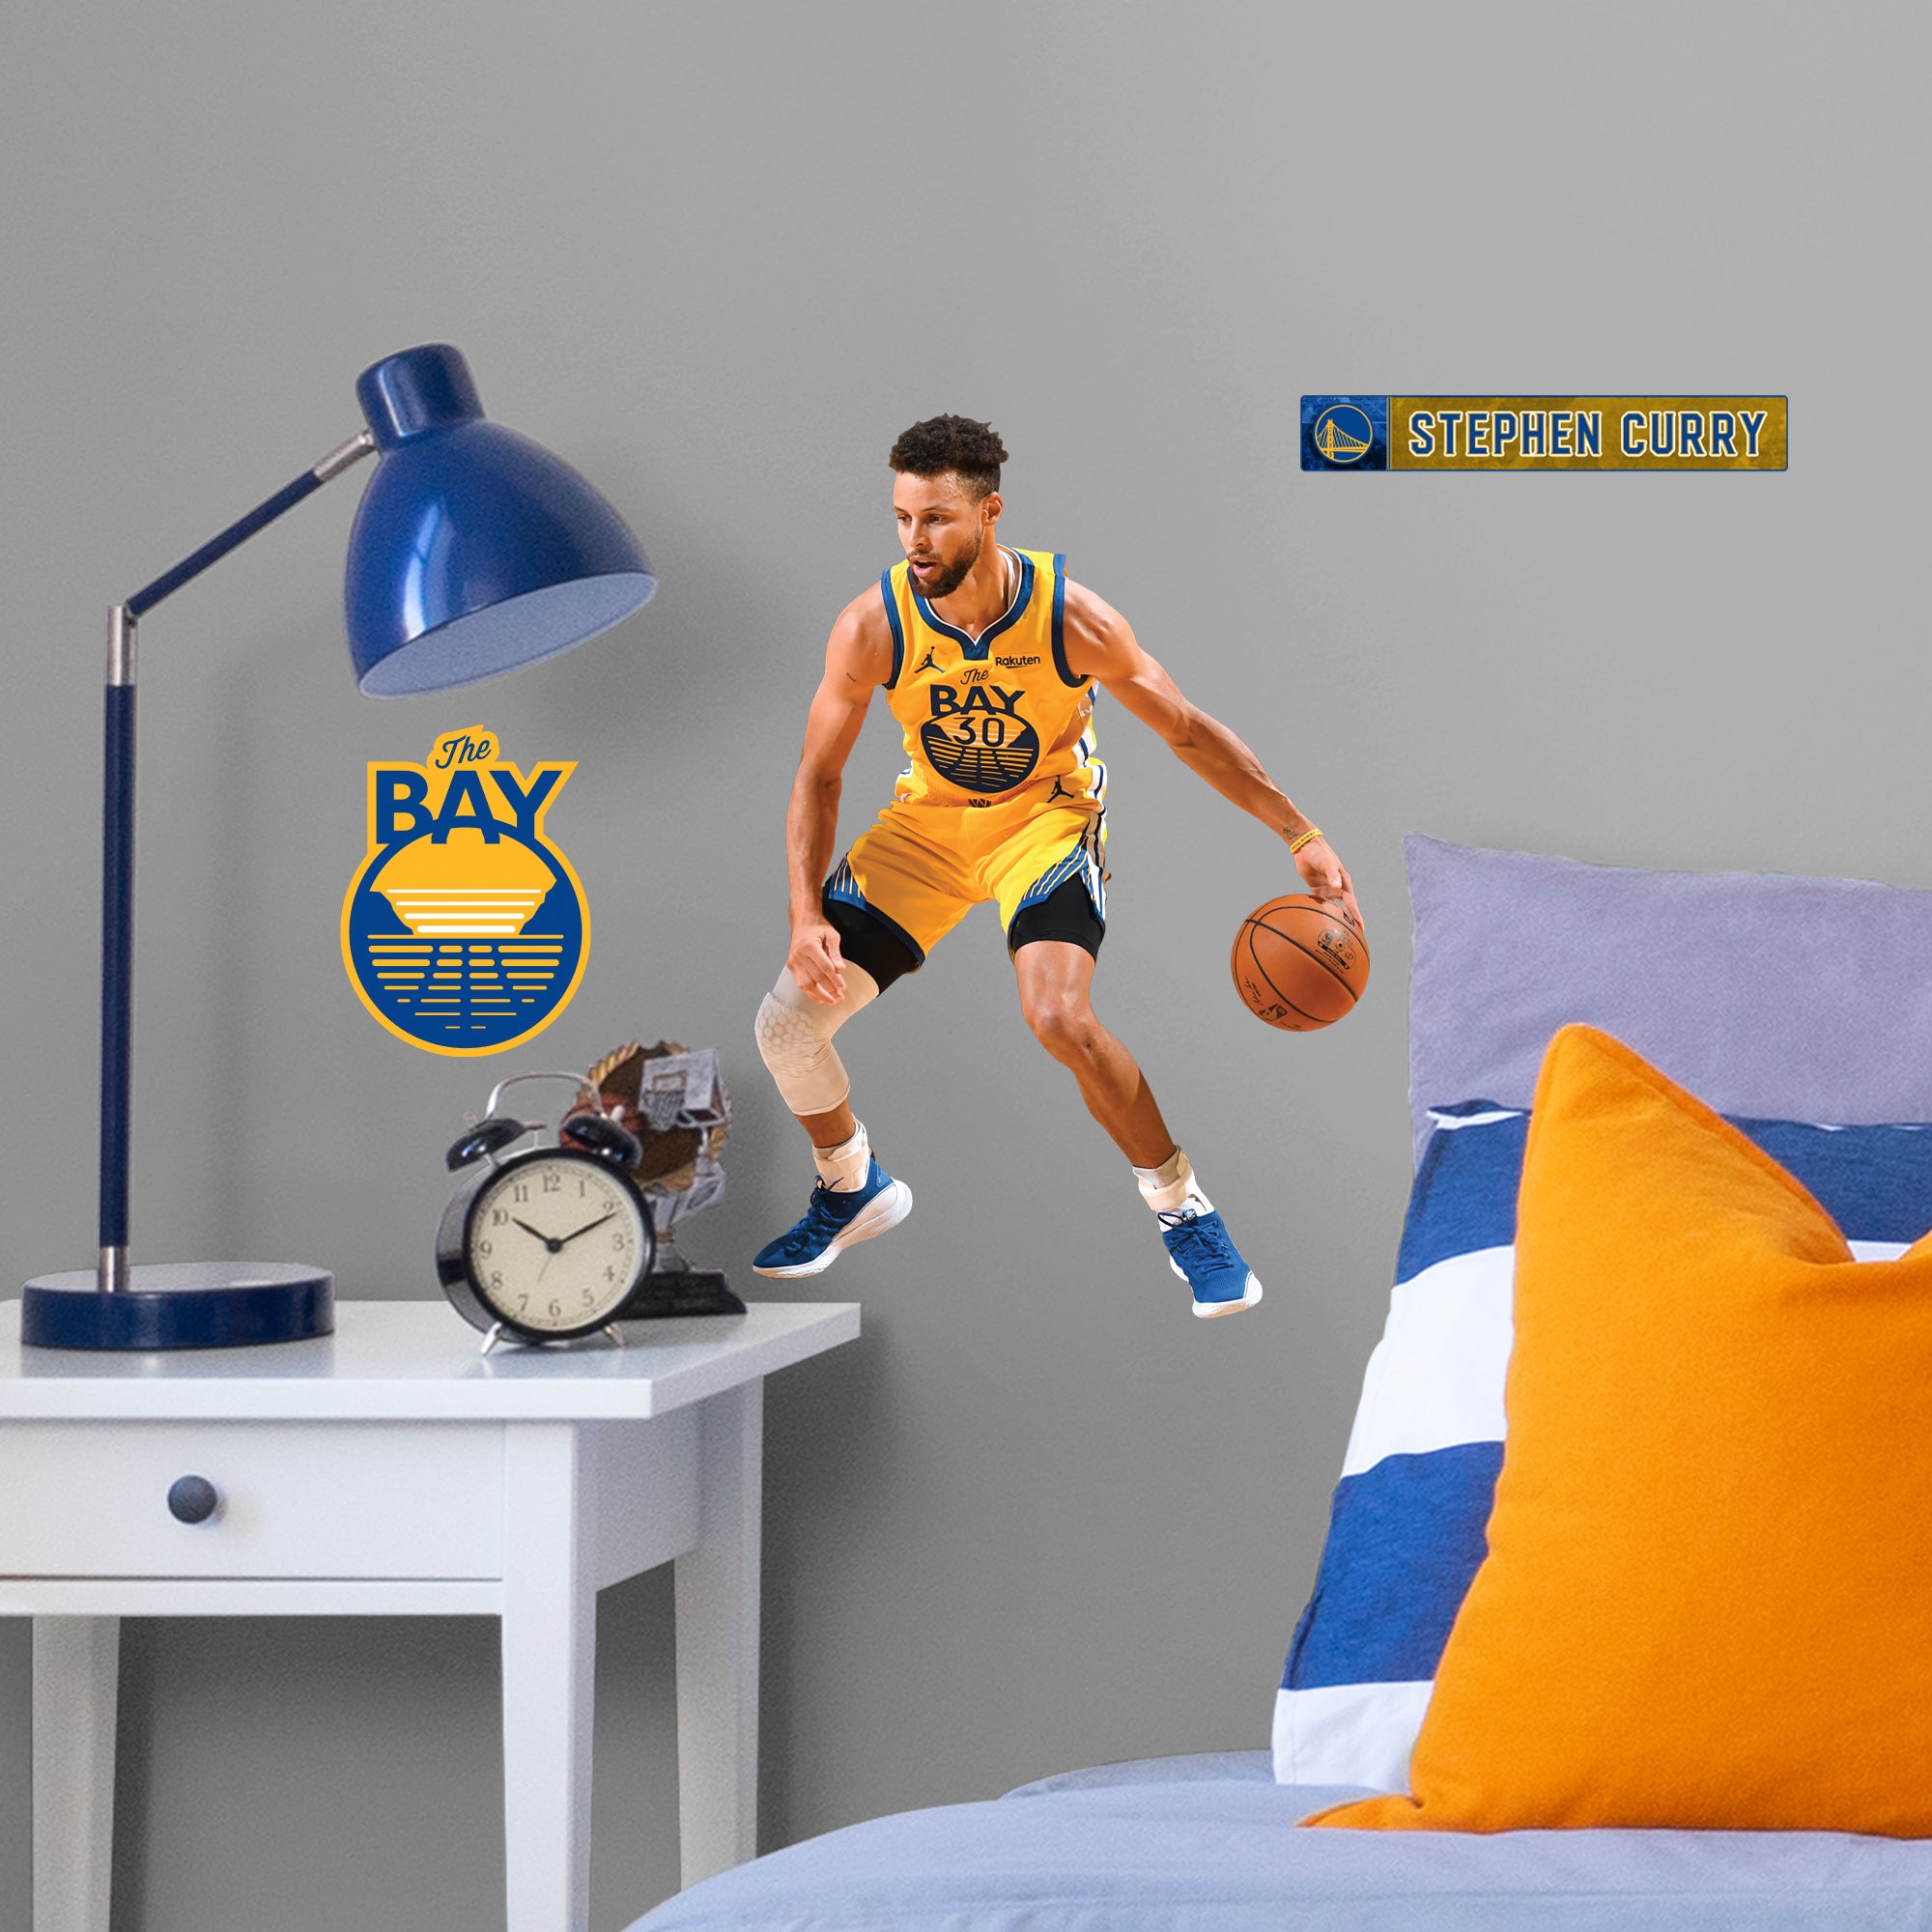 Stephen Curry 2021 The Bay - Officially Licensed NBA Removable Wall Decal Large by Fathead | Vinyl